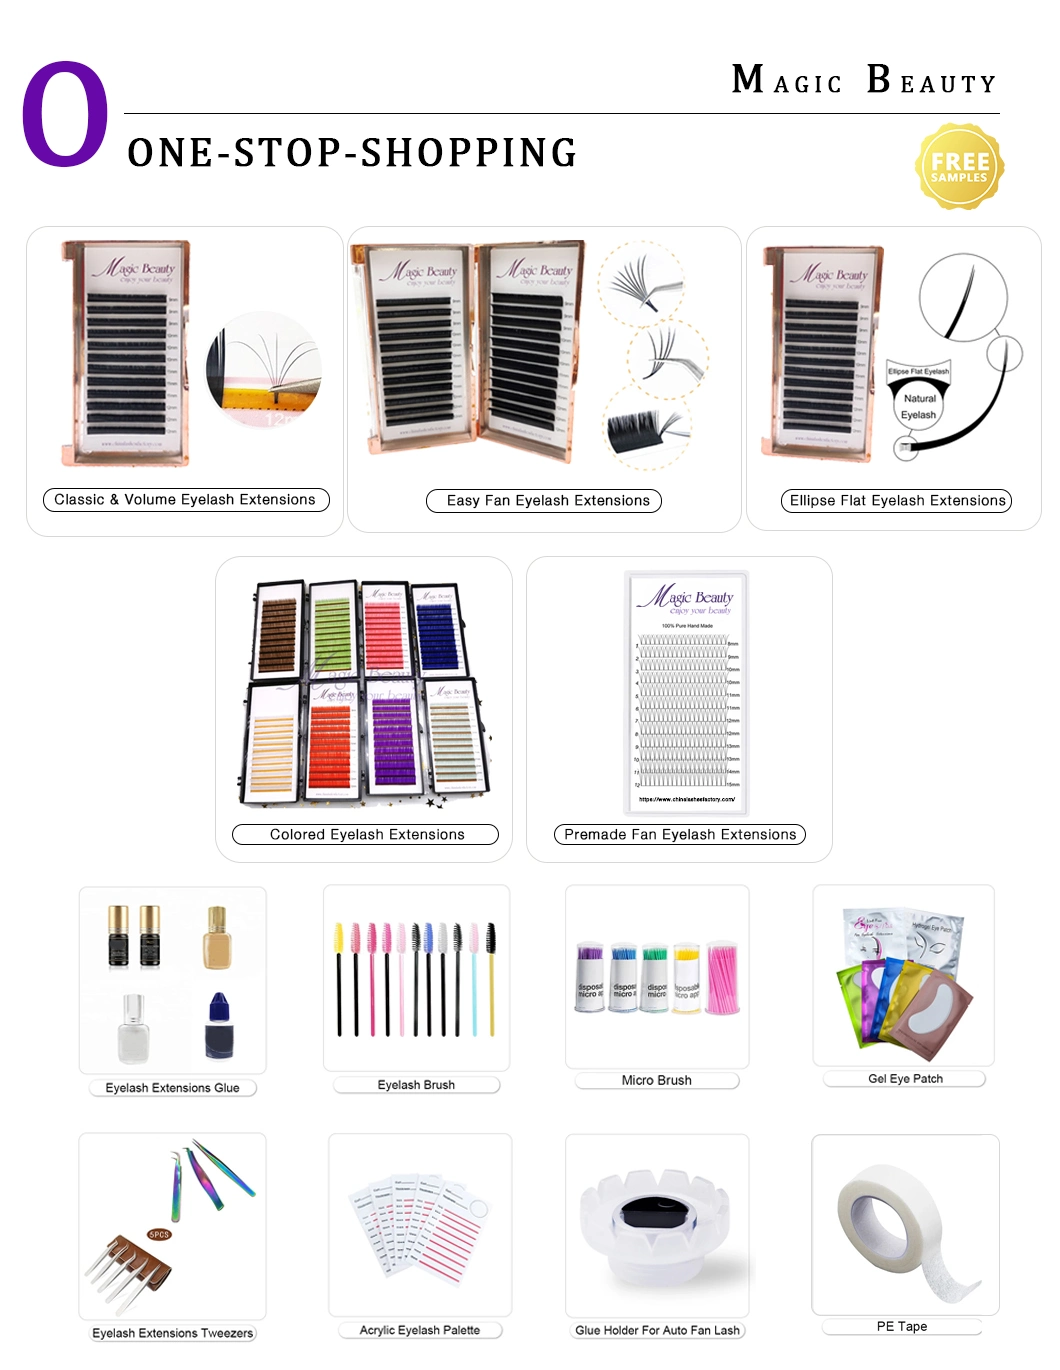 High Quality Russian Mega Volume Quick Fan Easy Fan Eyelashes Eyelash Extensions with Free Sample